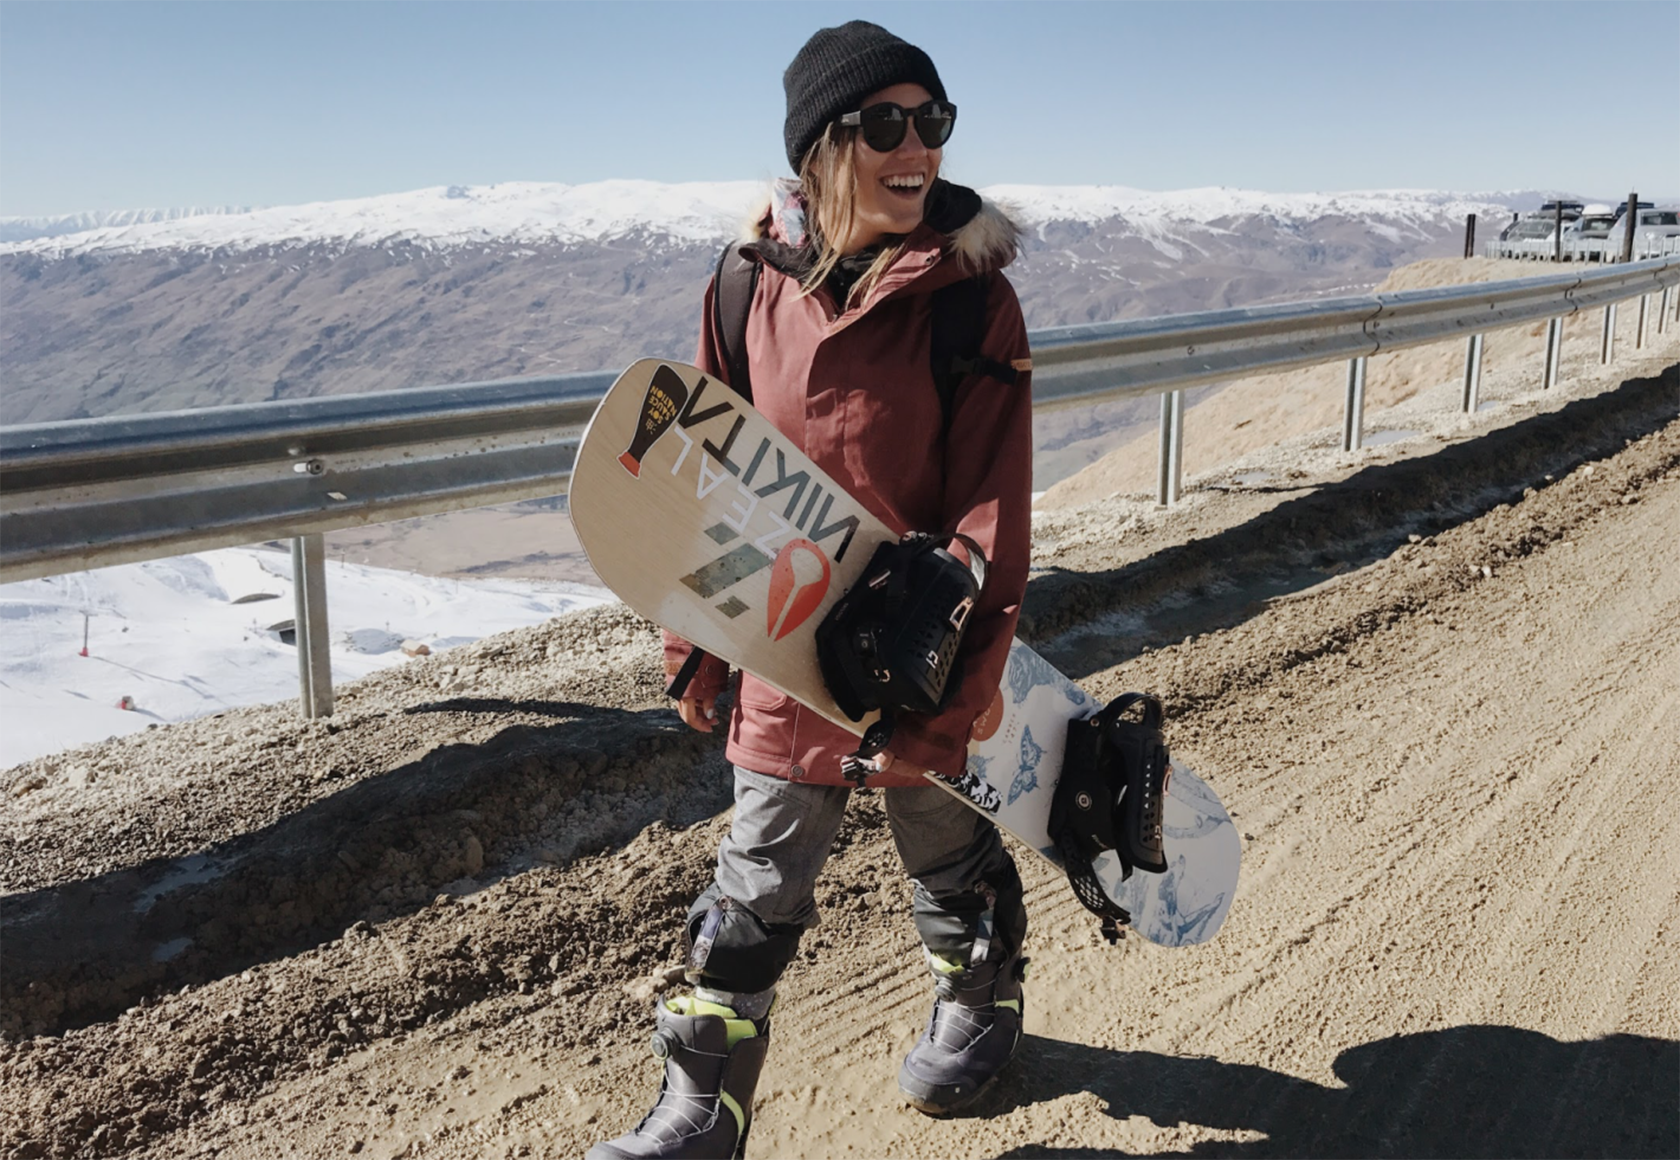 woman wearing red coat and black sunglasses carrying snowboard walks along a dirt road in the mountains